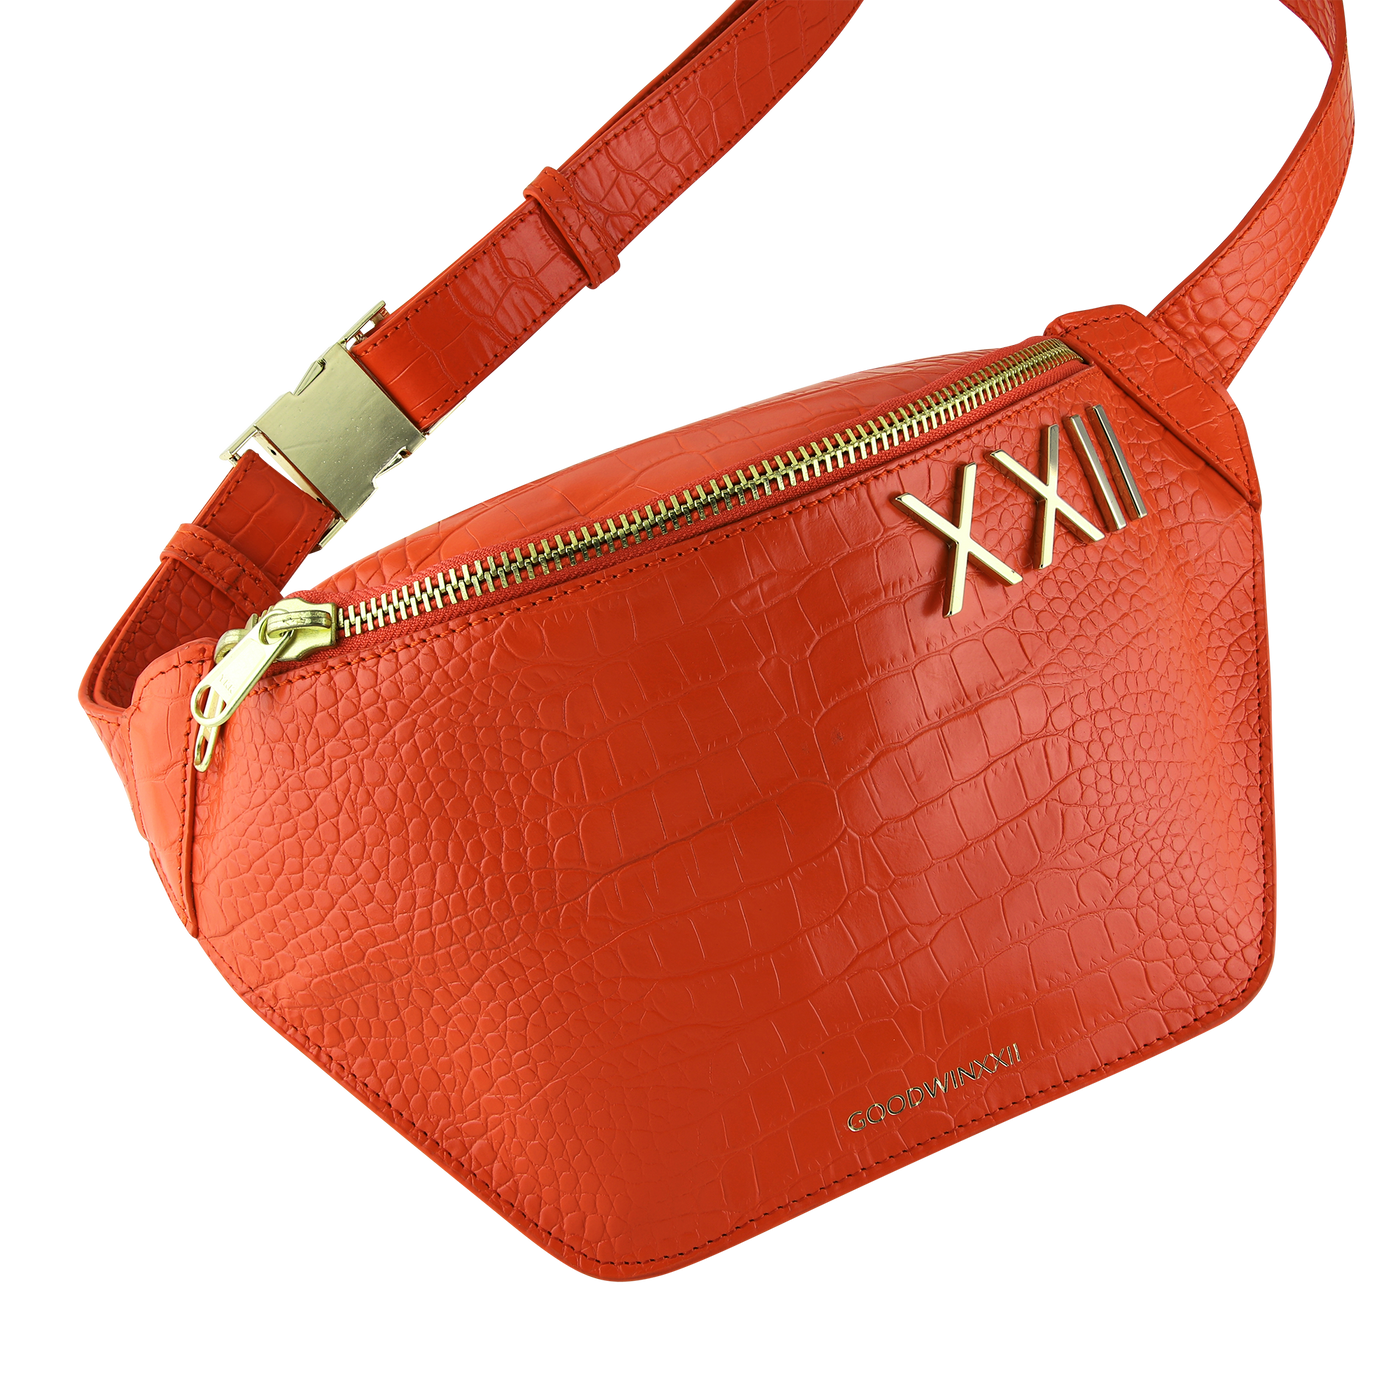 Goodwinxxii orange croc embossed leather fanny pack with gold hardware